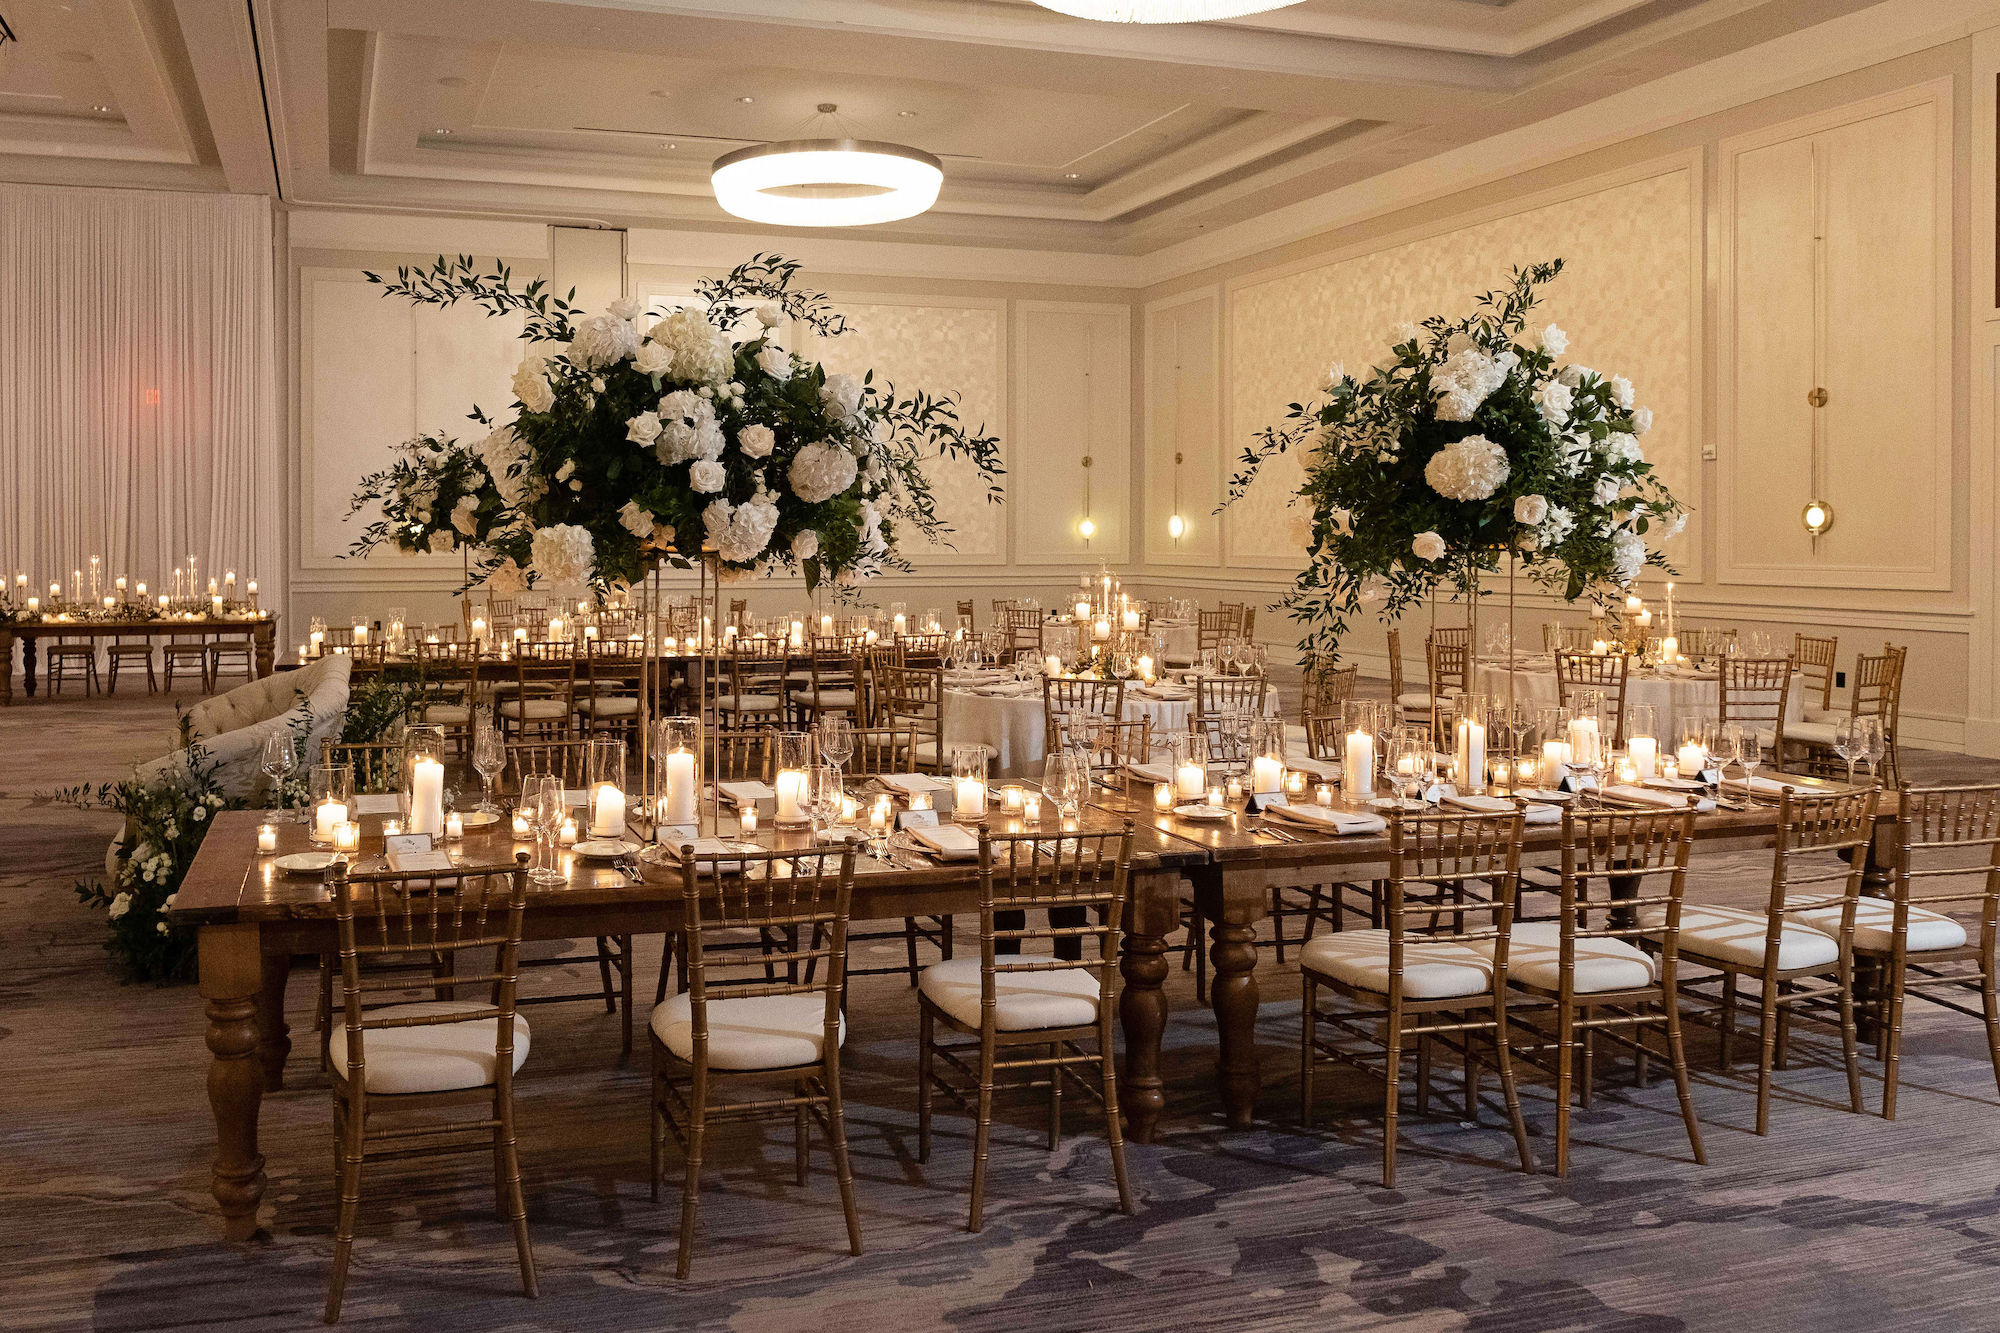 Elegant White Hydrangea and Rose Floral Arrangements with Ruscus Greenery | Candlelit Centerpieces | Tampa Bay Rental Company A Chair Affair | Florist Bruce Wayne Florals